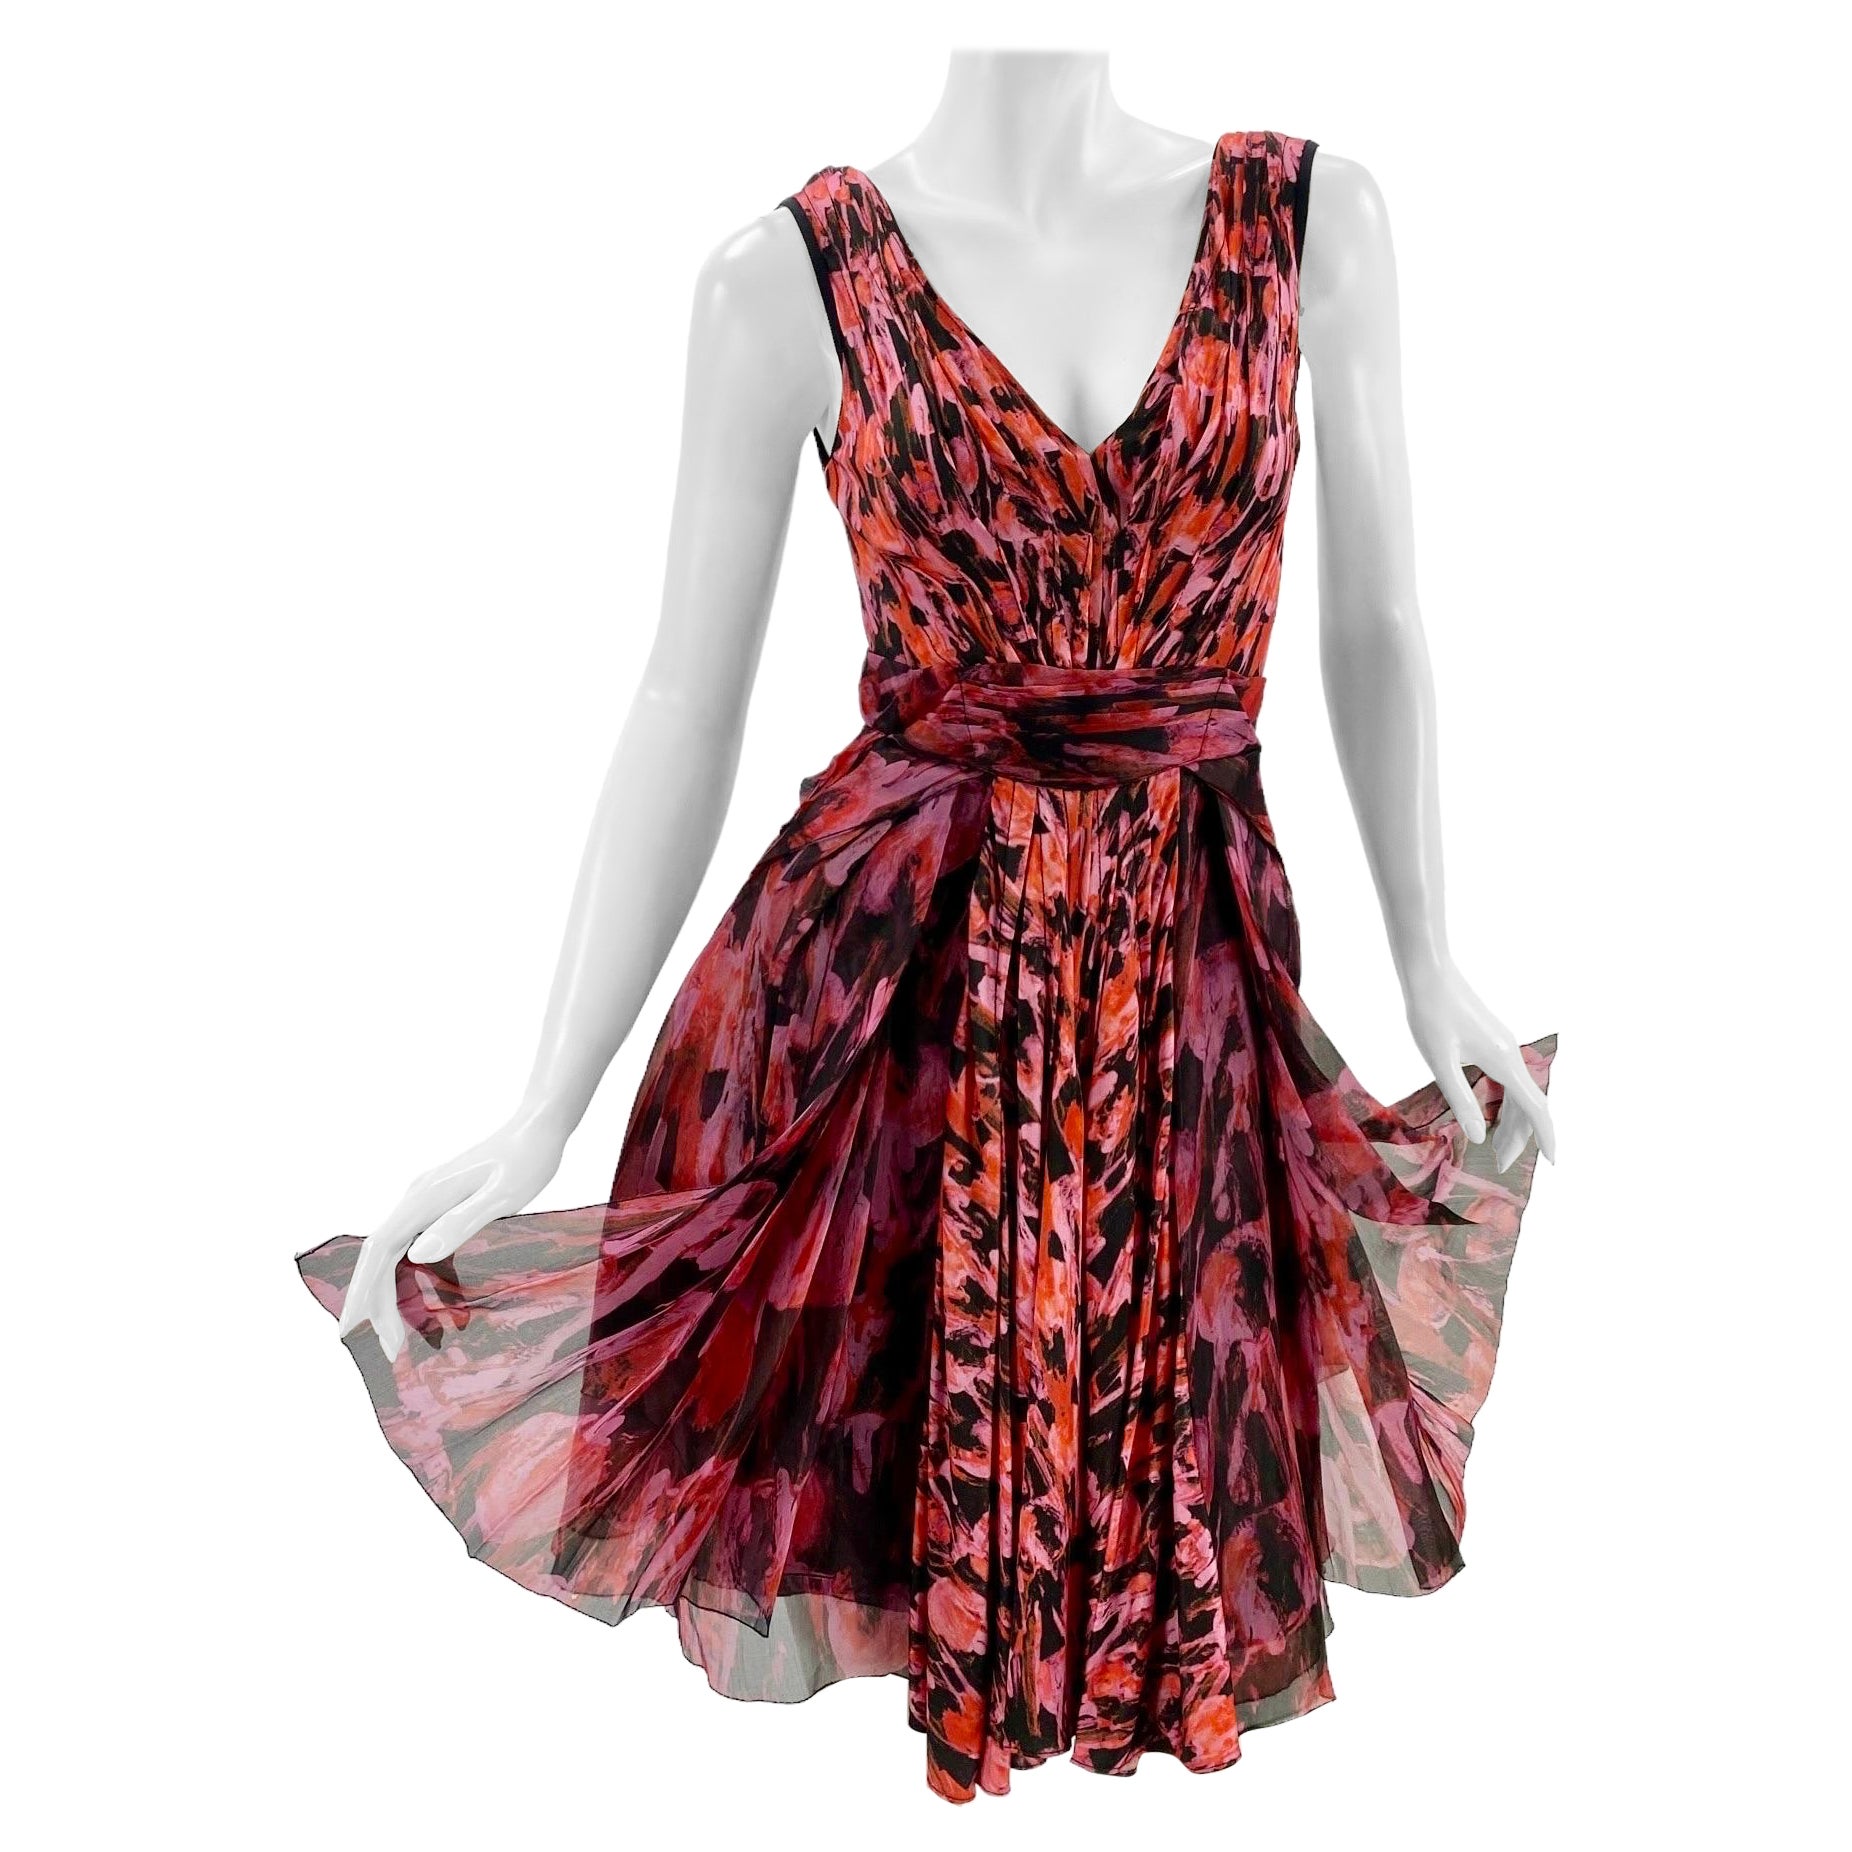 Zac Posen Floral Print Pink Dress as seen on magazine cover size 6